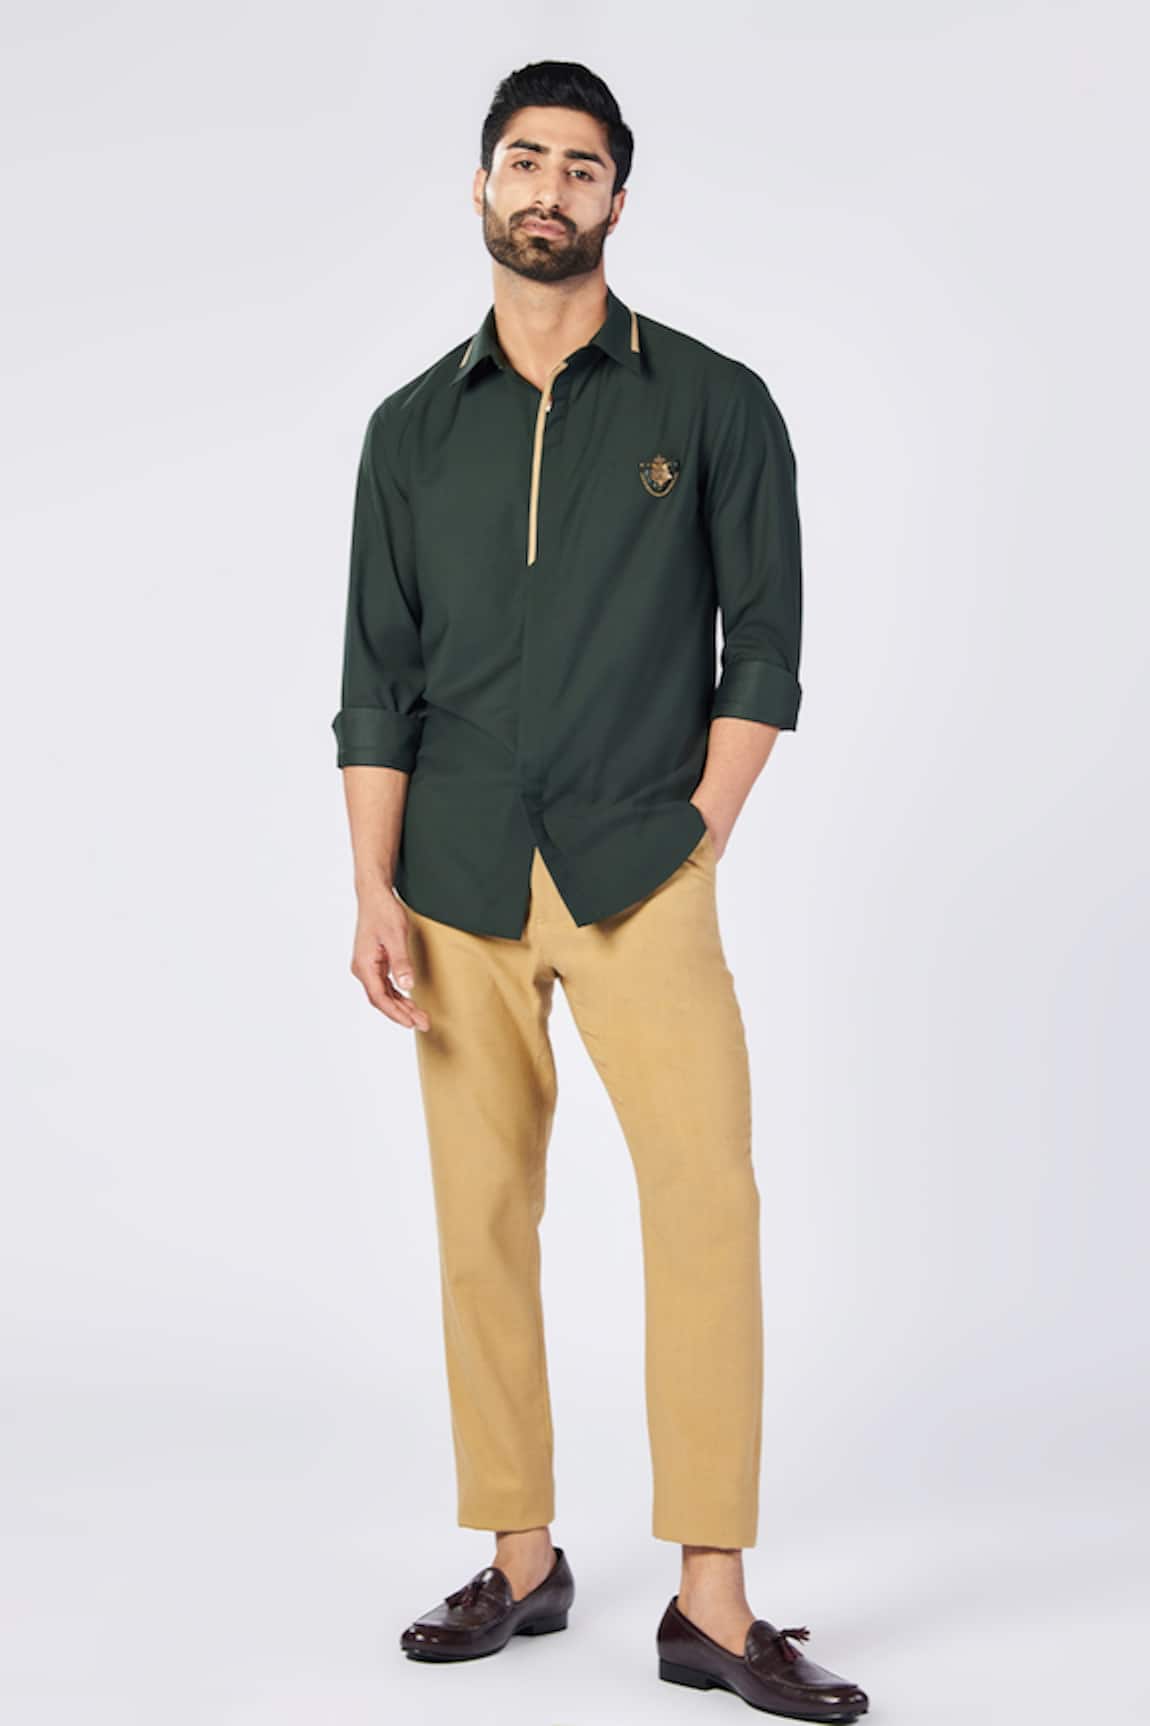 S&N by Shantnu Nikhil Placement Crest Embroidered Slim Fit Shirt